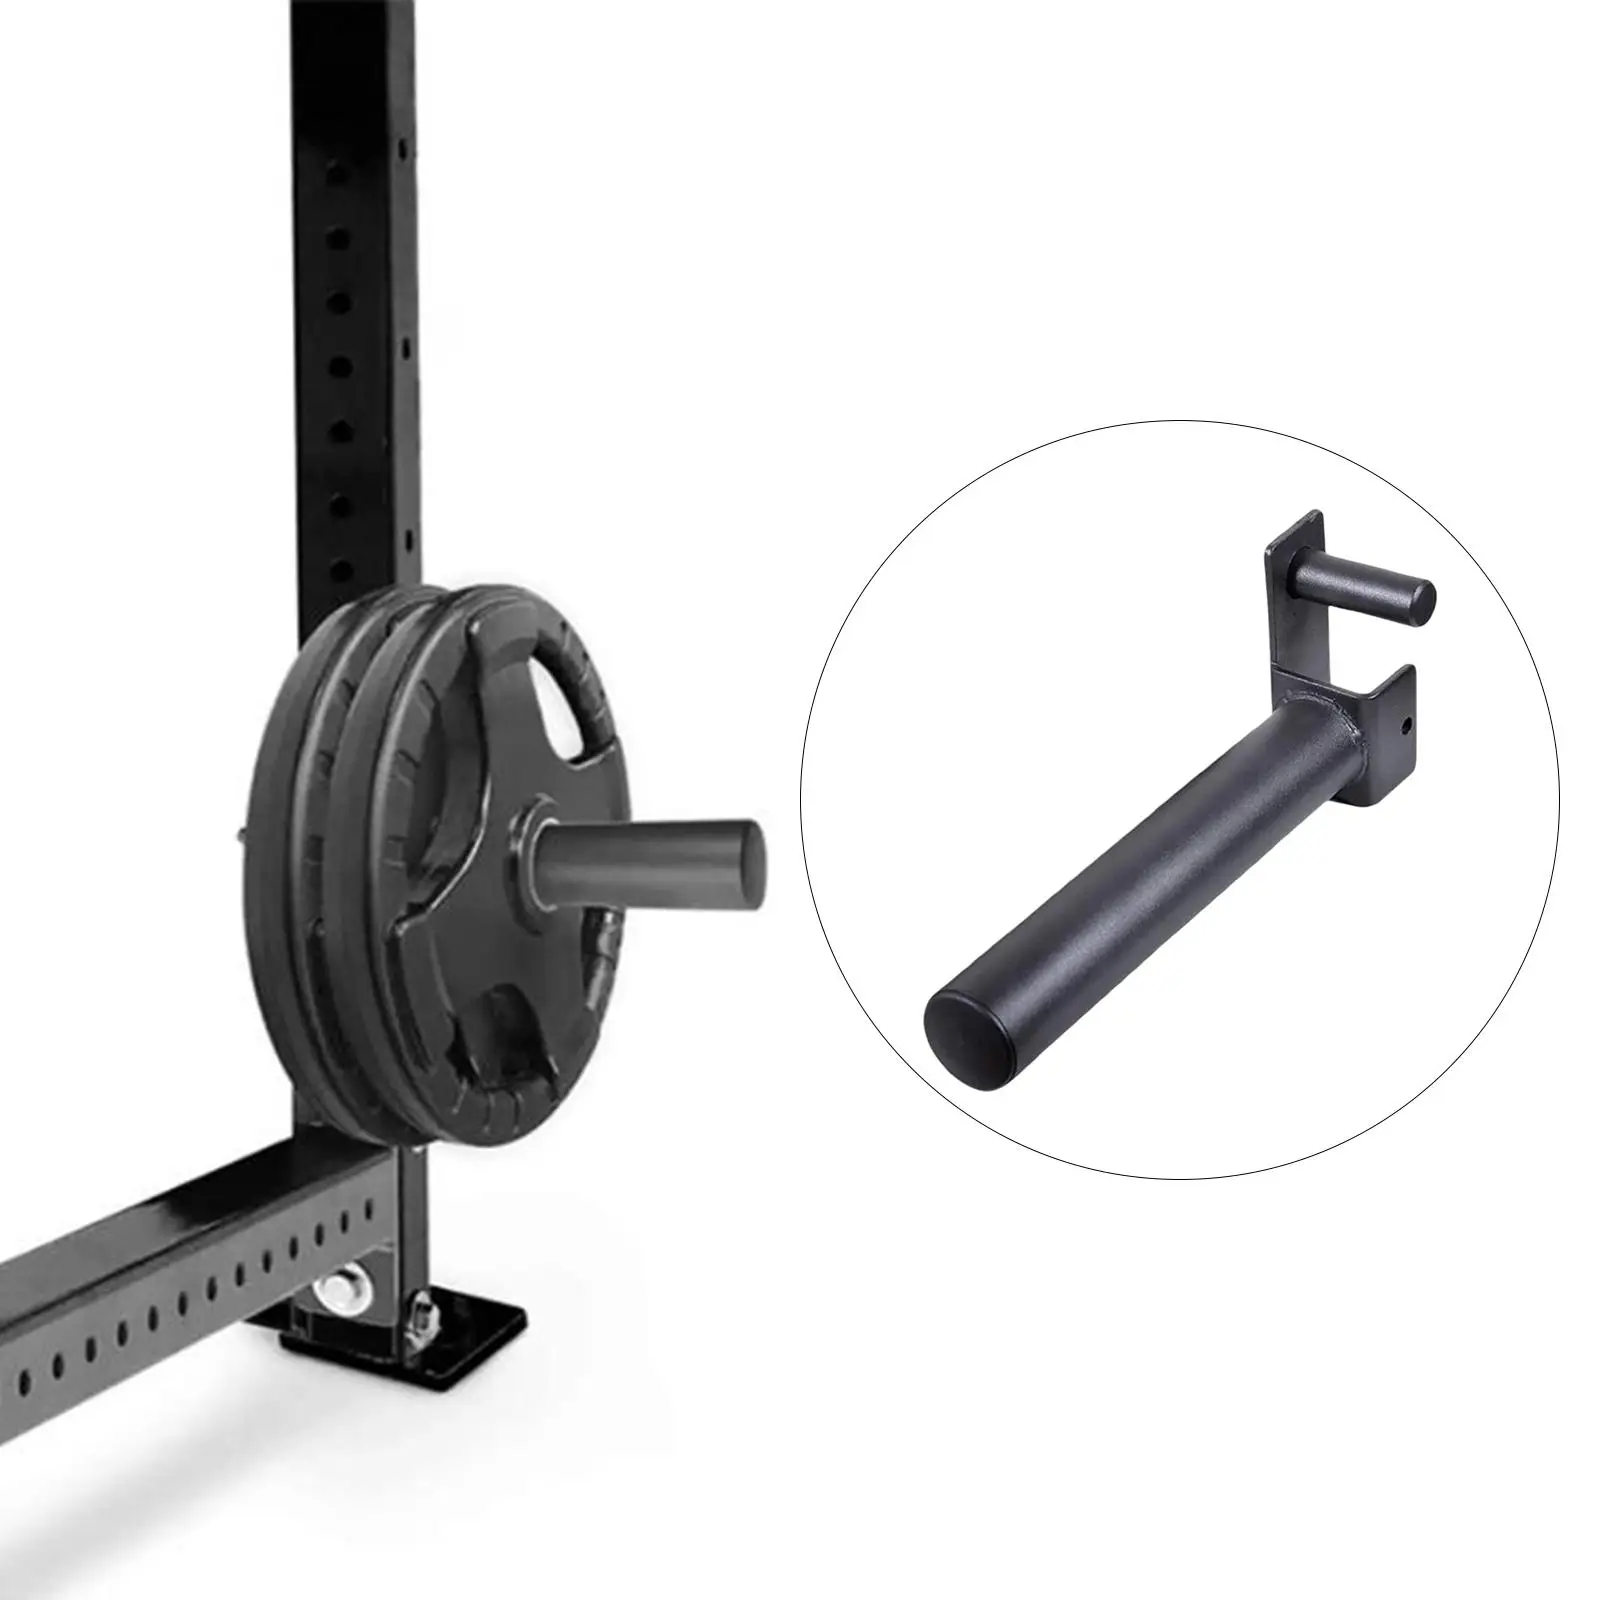 weight Training    Holder  Attachment  and gym Support Stand Organizer